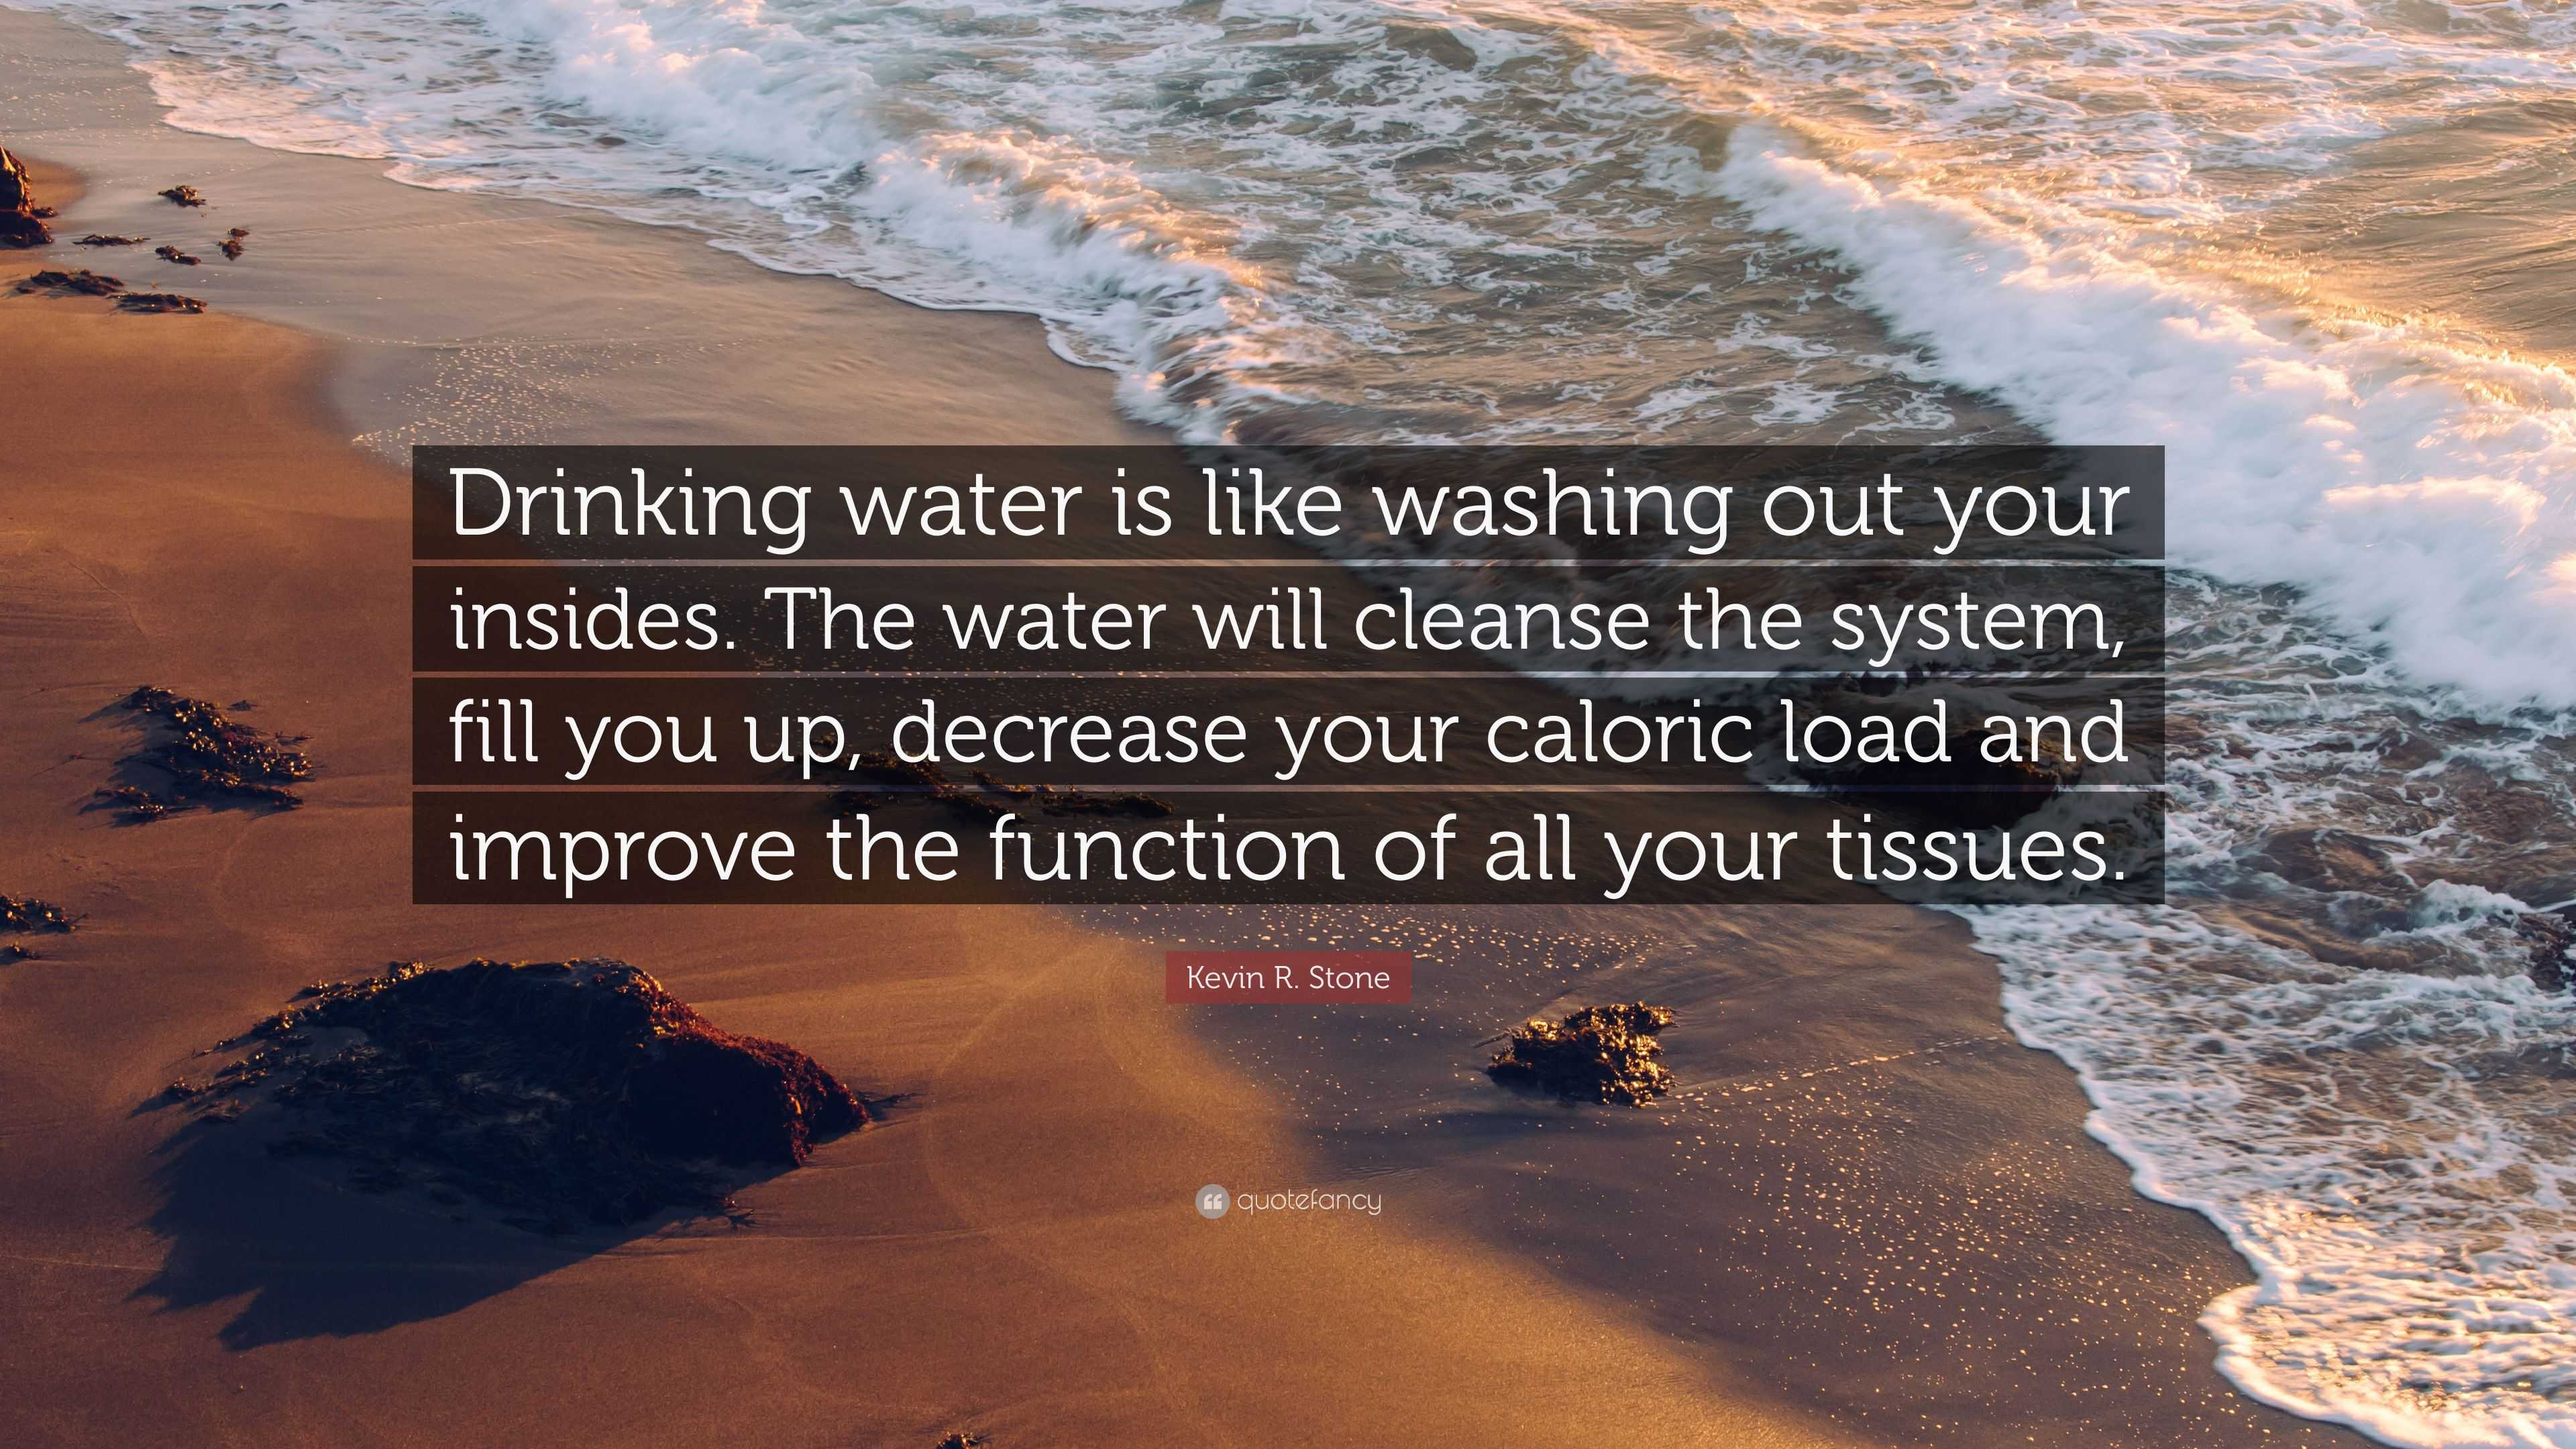 Kevin R. Stone Quote: “Drinking water is like washing out your insides ...